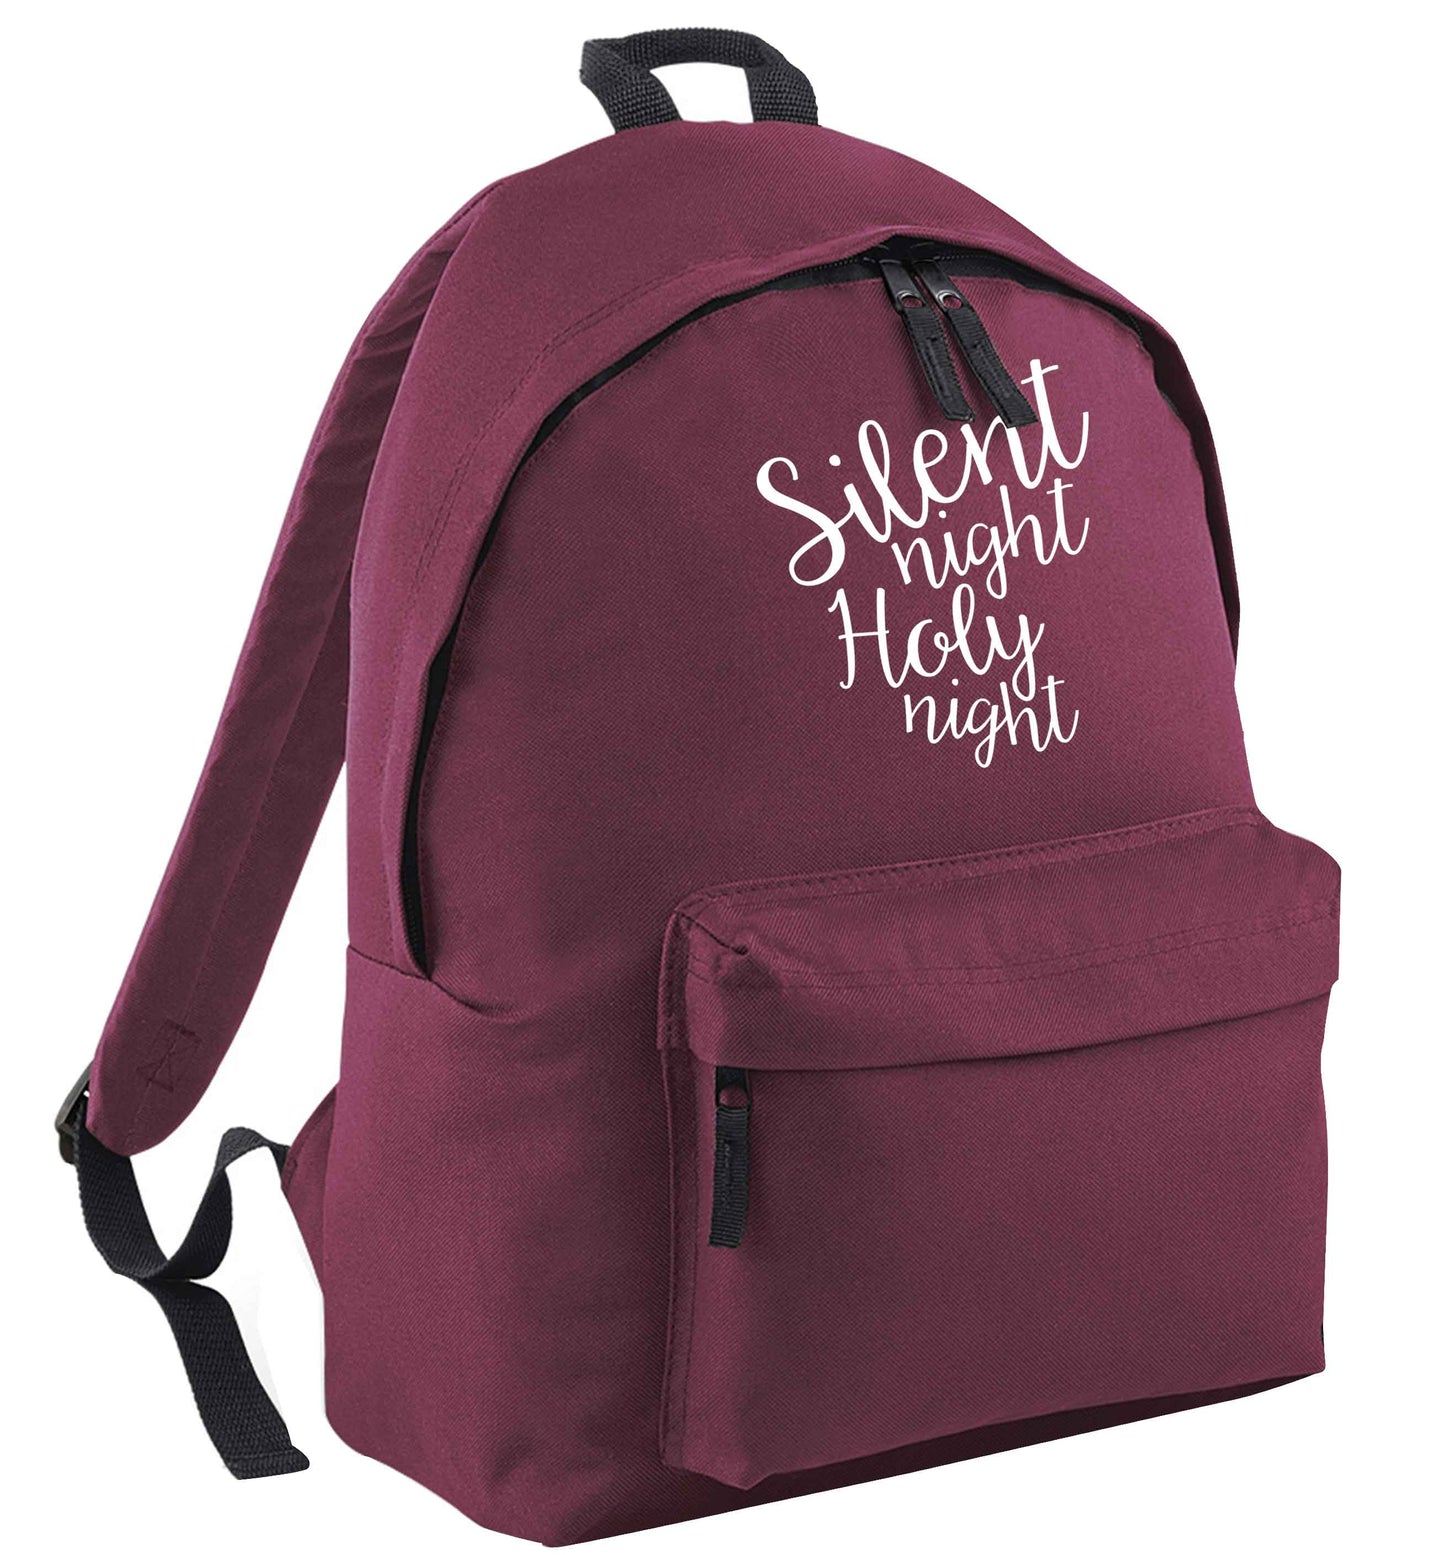 Silent night holy night maroon adults backpack